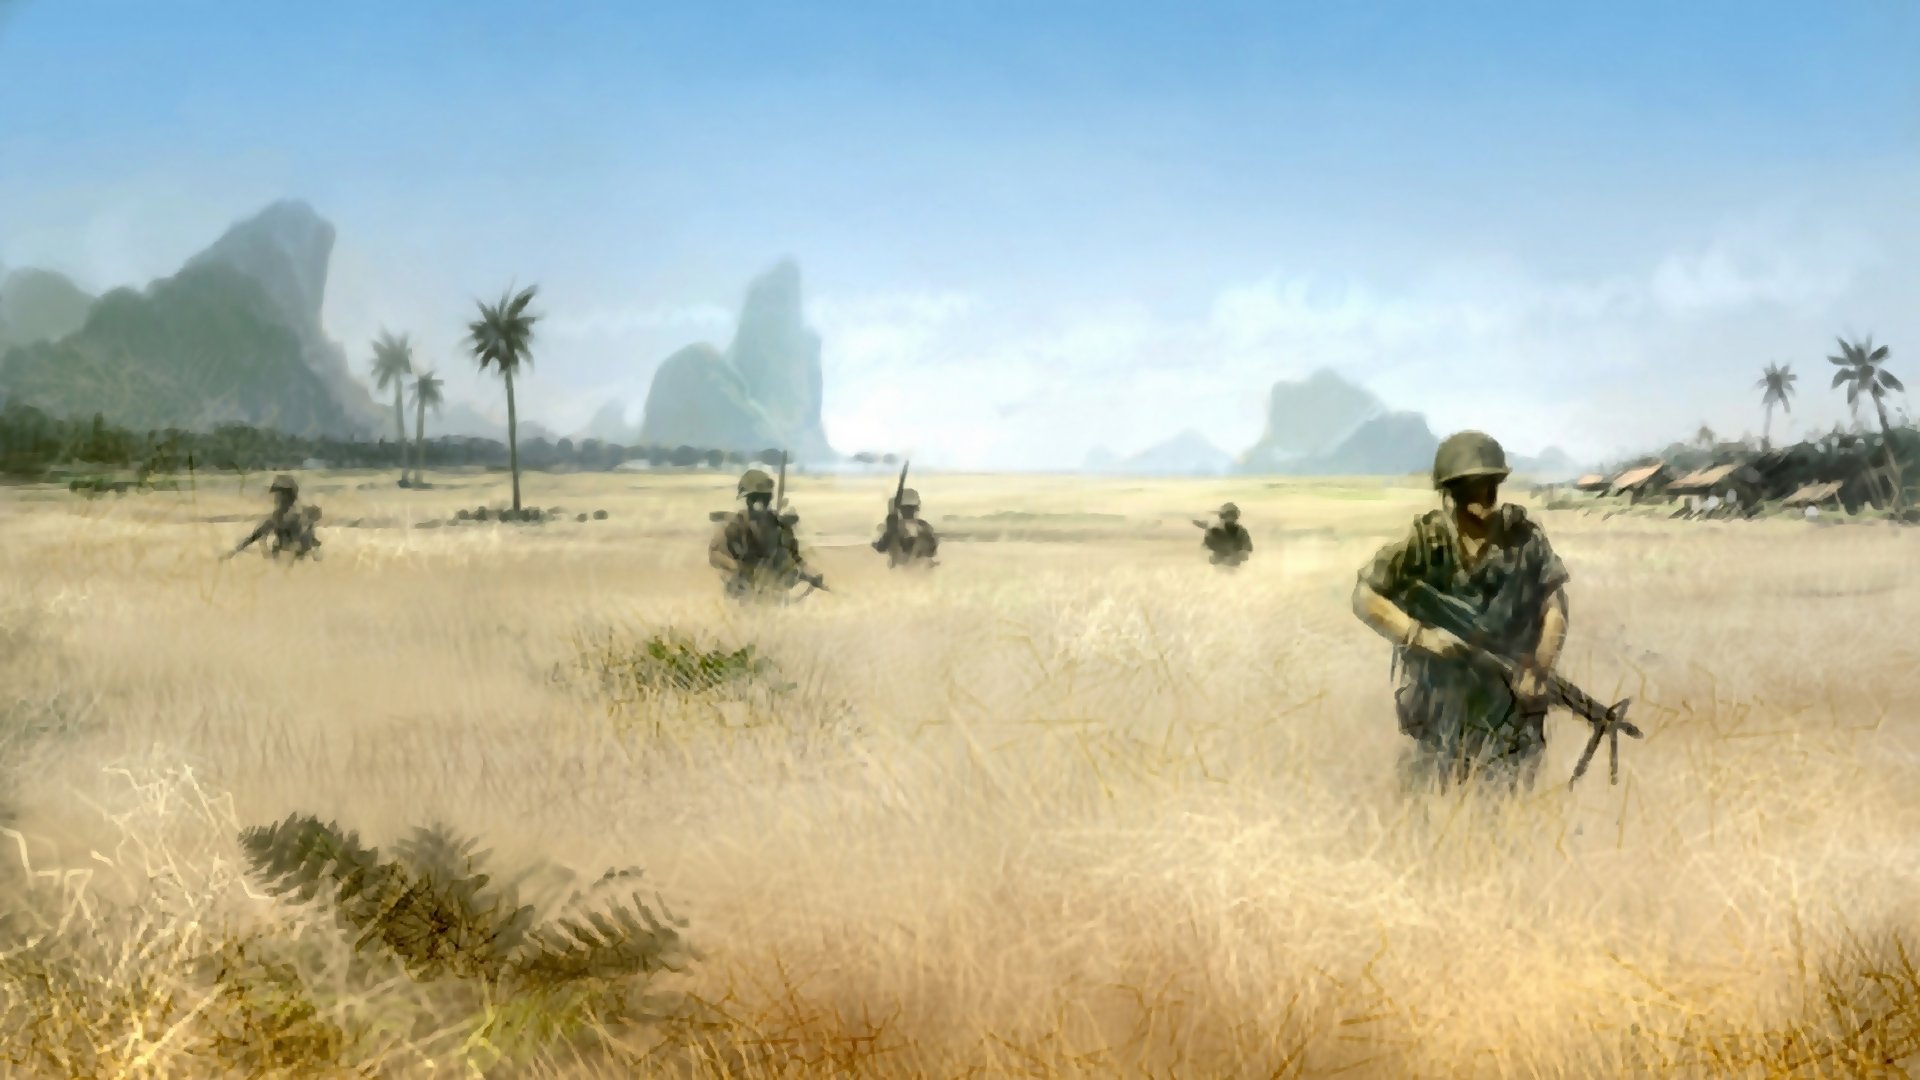 Download full hd 1920x1080 Soldier desktop background ID:496468 for free